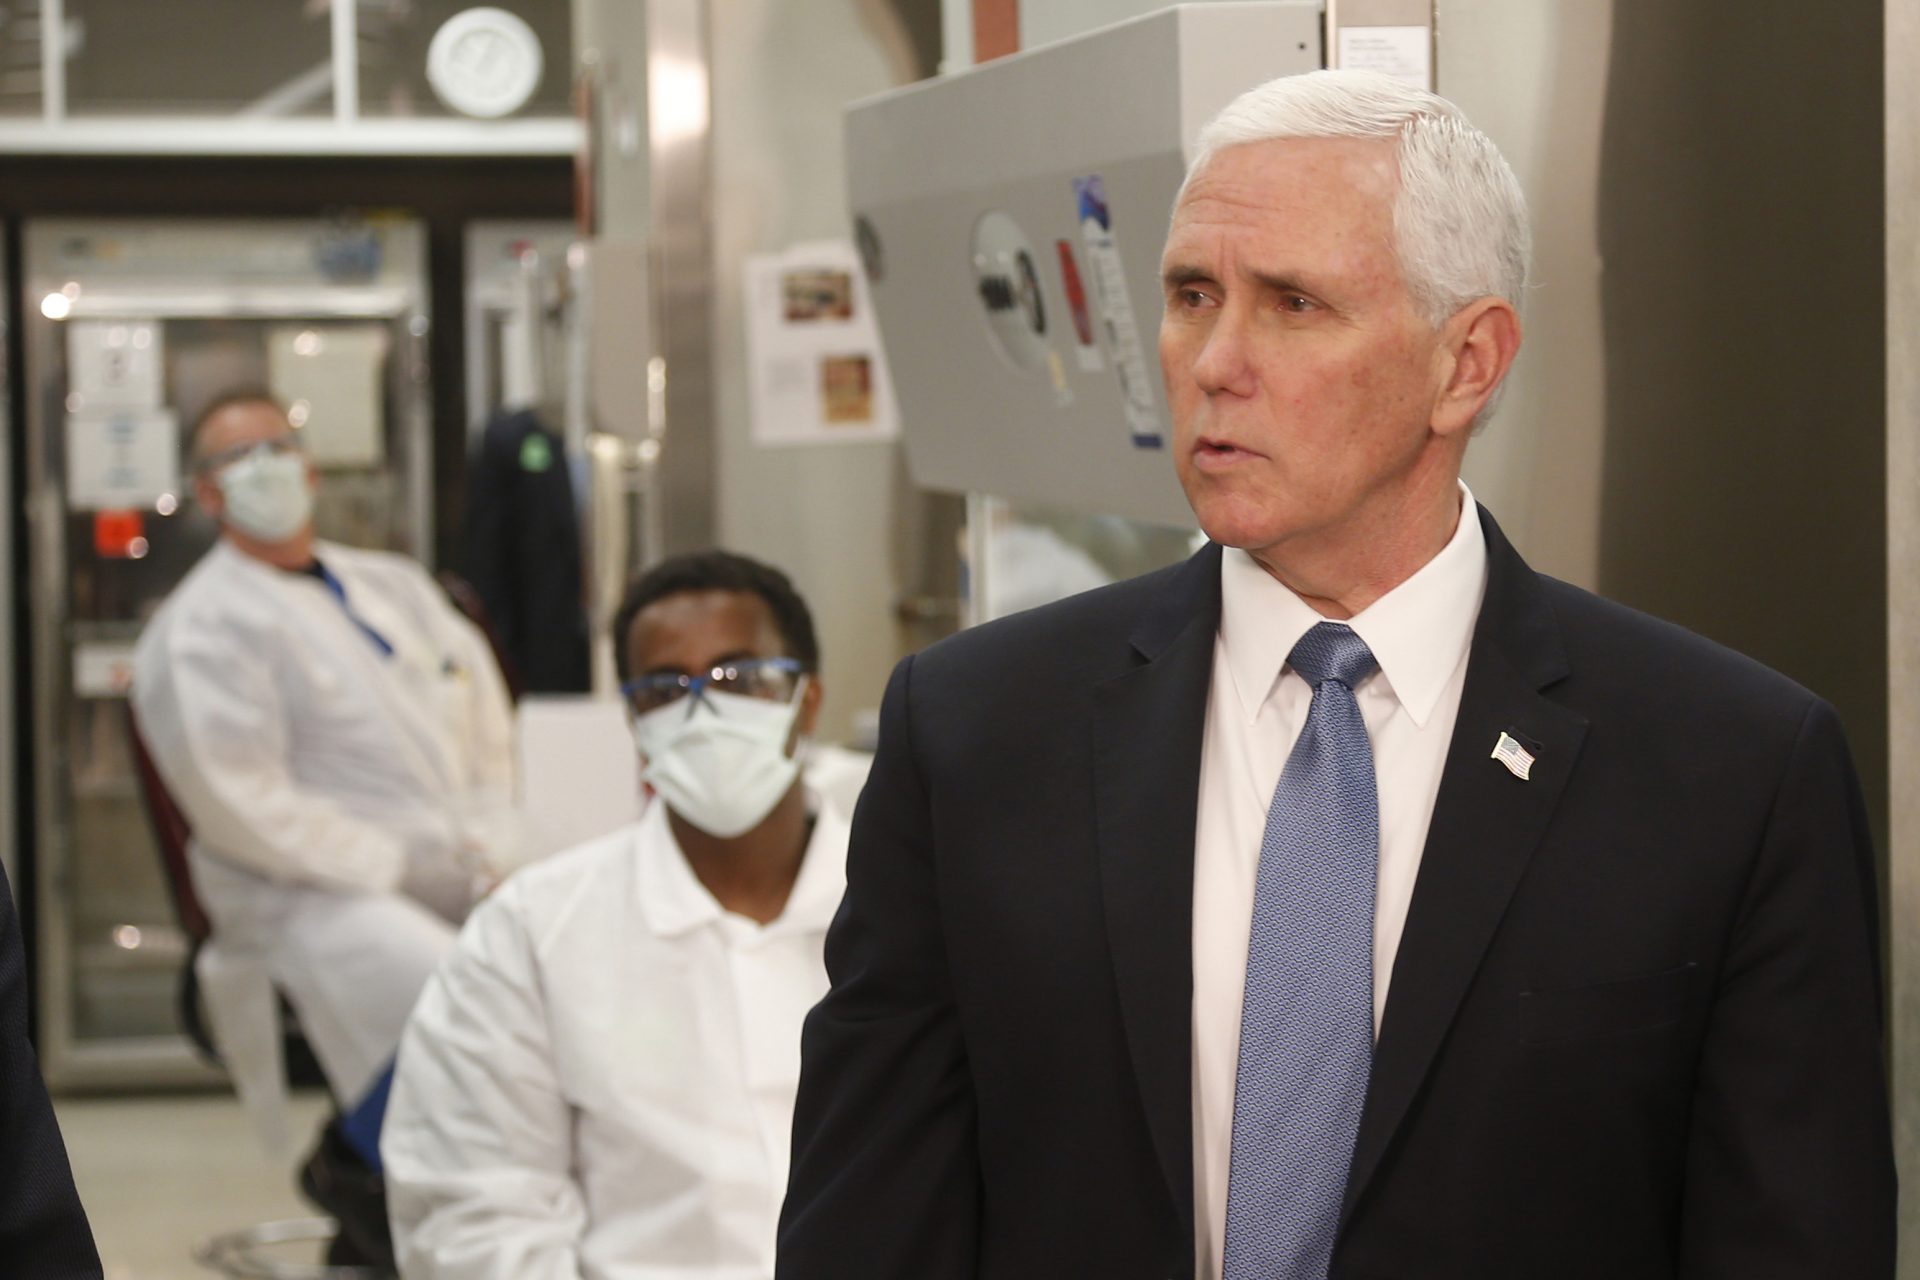 Vice President Mike Pence visits the molecular testing lab at Mayo Clinic Tuesday, April 28, 2020, in Rochester, Minn., where he toured the facilities supporting COVID-19 research and treatment. Pence chose not to wear a face mask while touring the Mayo Clinic in Minnesota. It's an apparent violation of the world-renowned medical center's policy requiring them.